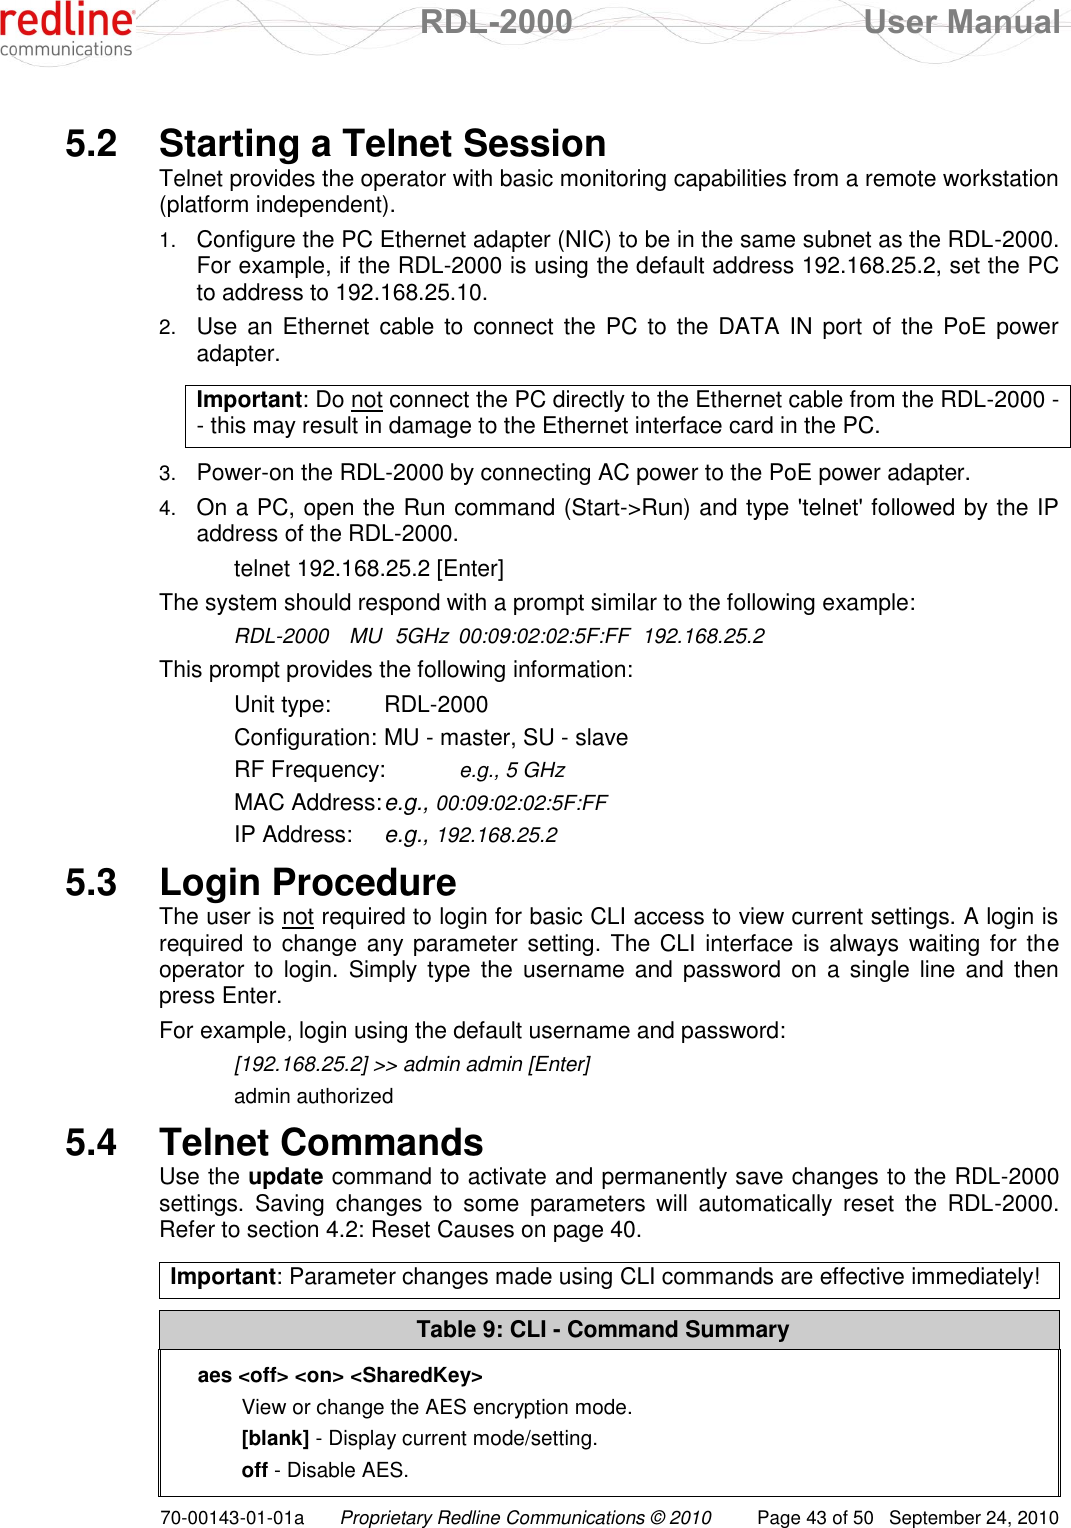  RDL-2000  User Manual 70-00143-01-01a Proprietary Redline Communications © 2010  Page 43 of 50  September 24, 2010  5.2  Starting a Telnet Session Telnet provides the operator with basic monitoring capabilities from a remote workstation (platform independent). 1. Configure the PC Ethernet adapter (NIC) to be in the same subnet as the RDL-2000. For example, if the RDL-2000 is using the default address 192.168.25.2, set the PC to address to 192.168.25.10. 2. Use an Ethernet  cable to connect  the  PC to the DATA  IN  port  of the PoE power adapter.  Important: Do not connect the PC directly to the Ethernet cable from the RDL-2000 -- this may result in damage to the Ethernet interface card in the PC.  3. Power-on the RDL-2000 by connecting AC power to the PoE power adapter. 4. On a PC, open the Run command (Start-&gt;Run) and type &apos;telnet&apos; followed by the IP address of the RDL-2000.    telnet 192.168.25.2 [Enter] The system should respond with a prompt similar to the following example:  RDL-2000  MU  5GHz  00:09:02:02:5F:FF  192.168.25.2 This prompt provides the following information: Unit type:  RDL-2000 Configuration: MU - master, SU - slave RF Frequency:  e.g., 5 GHz MAC Address: e.g., 00:09:02:02:5F:FF IP Address:  e.g., 192.168.25.2 5.3  Login Procedure The user is not required to login for basic CLI access to view current settings. A login is required to  change any parameter  setting. The CLI  interface is always waiting for the operator to  login.  Simply type  the  username and password  on  a single  line  and  then press Enter.  For example, login using the default username and password:   [192.168.25.2] &gt;&gt; admin admin [Enter]   admin authorized 5.4  Telnet Commands Use the update command to activate and permanently save changes to the RDL-2000 settings.  Saving  changes  to  some  parameters  will  automatically  reset  the  RDL-2000. Refer to section 4.2: Reset Causes on page 40.  Important: Parameter changes made using CLI commands are effective immediately!  Table 9: CLI - Command Summary aes &lt;off&gt; &lt;on&gt; &lt;SharedKey&gt; View or change the AES encryption mode. [blank] - Display current mode/setting. off - Disable AES. 